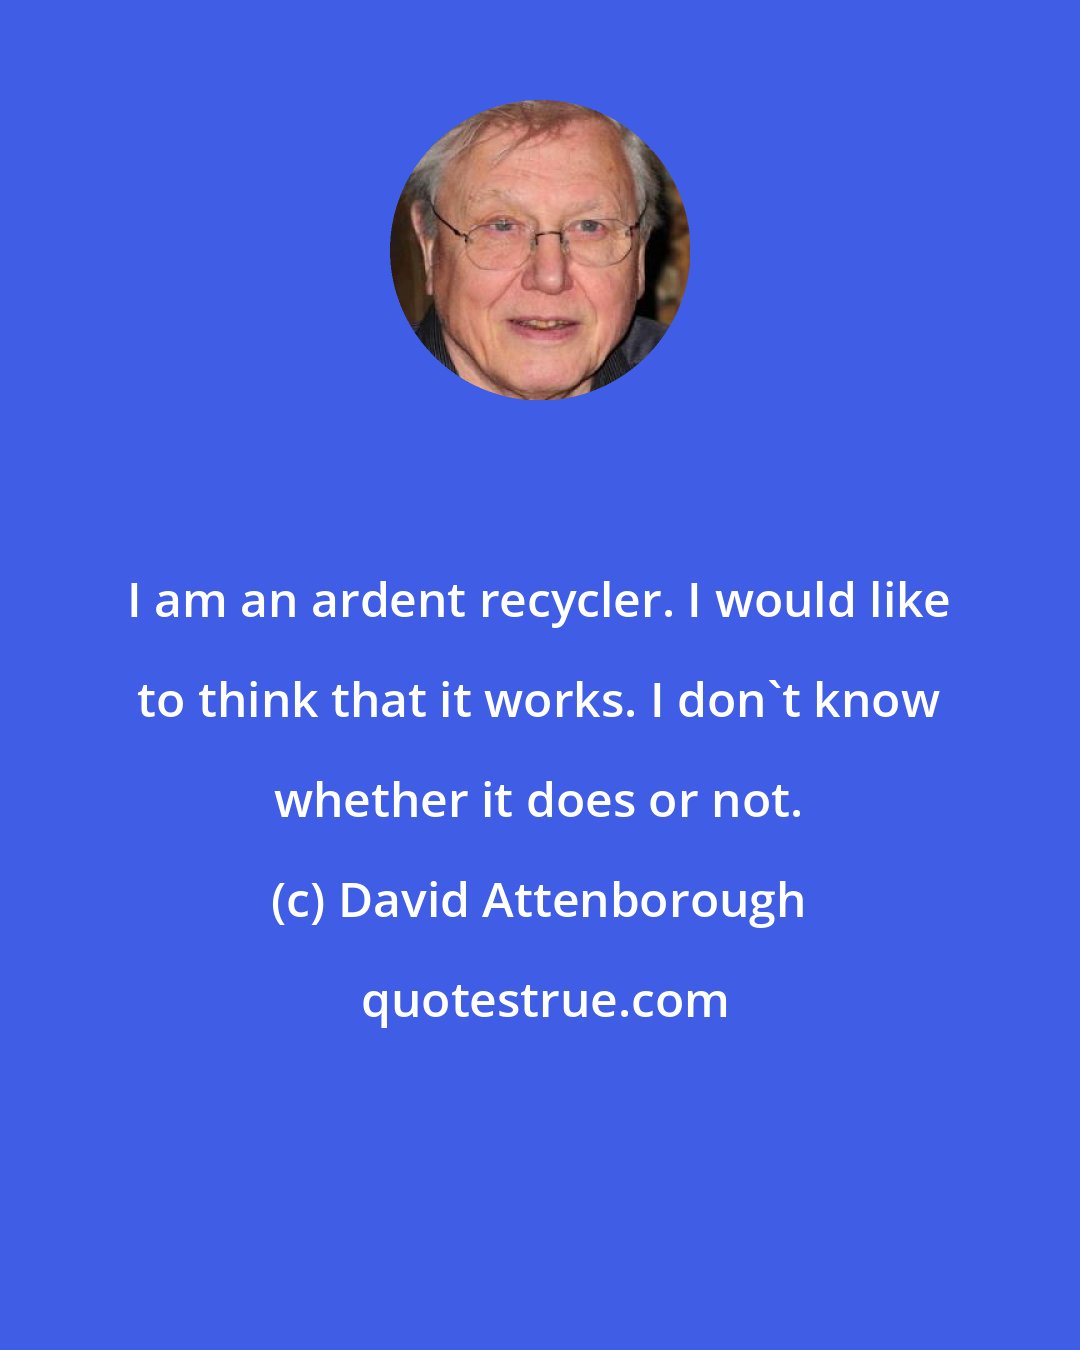 David Attenborough: I am an ardent recycler. I would like to think that it works. I don't know whether it does or not.